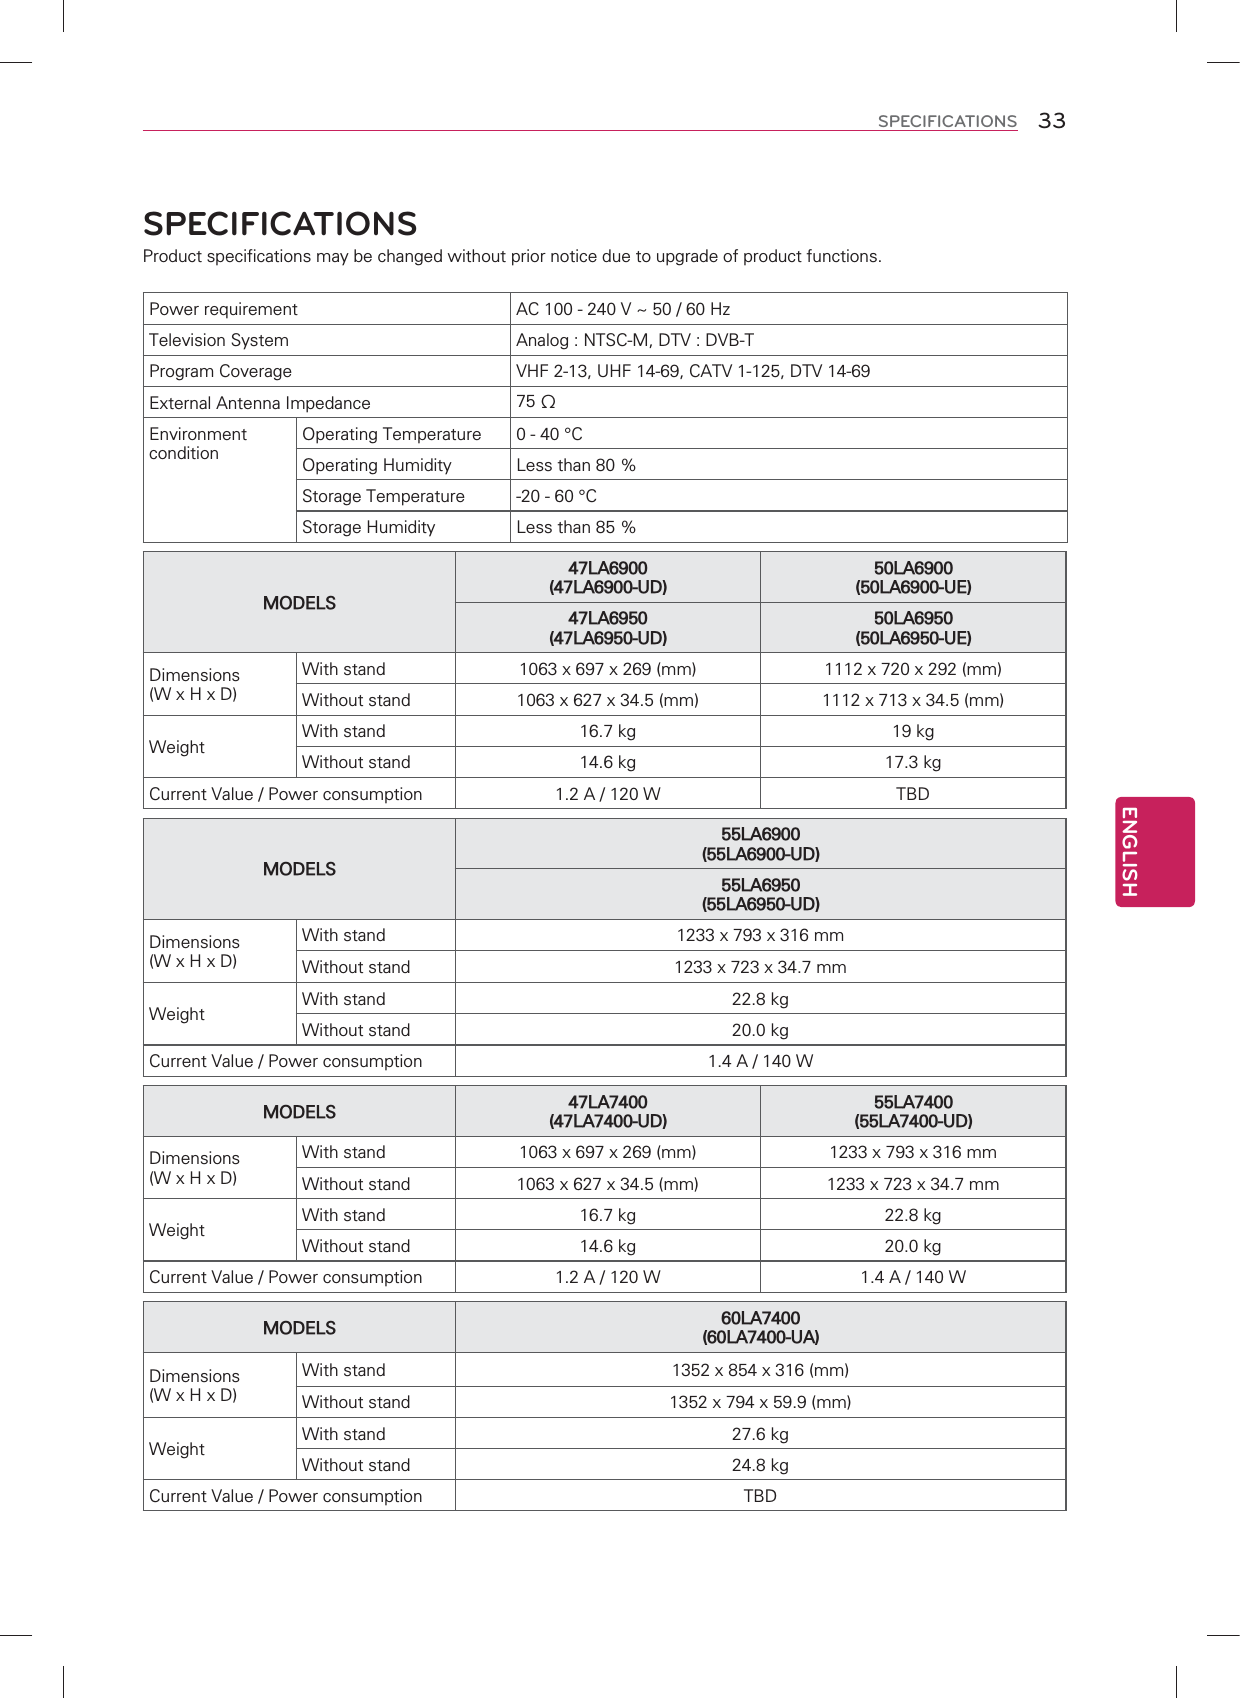 ENGLISH33SPECIFICATIONSSPECIFICATIONSProduct specifications may be changed without prior notice due to upgrade of product functions.Power requirement AC 100 - 240 V ~ 50 / 60 HzTelevision System Analog : NTSC-M, DTV : DVB-TProgram Coverage VHF 2-13, UHF 14-69, CATV 1-125, DTV 14-69External Antenna Impedance 75 ΩEnvironmentconditionOperating Temperature 0 - 40 °COperating Humidity Less than 80 %Storage Temperature -20 - 60 °CStorage Humidity Less than 85 %MODELS47LA6900(47LA6900-UD)50LA6900(50LA6900-UE)47LA6950(47LA6950-UD)50LA6950(50LA6950-UE)Dimensions(W x H x D)With stand 1063 x 697 x 269 (mm) 1112 x 720 x 292 (mm)Without stand 1063 x 627 x 34.5 (mm) 1112 x 713 x 34.5 (mm)Weight With stand 16.7 kg 19 kgWithout stand 14.6 kg 17.3 kgCurrent Value / Power consumption 1.2 A / 120 W TBDMODELS55LA6900(55LA6900-UD)55LA6950(55LA6950-UD)Dimensions(W x H x D)With stand 1233 x 793 x 316 mmWithout stand 1233 x 723 x 34.7 mmWeight With stand 22.8 kgWithout stand 20.0 kgCurrent Value / Power consumption 1.4 A / 140 WMODELS 47LA7400 (47LA7400-UD)55LA7400(55LA7400-UD)Dimensions(W x H x D)With stand 1063 x 697 x 269 (mm) 1233 x 793 x 316 mmWithout stand 1063 x 627 x 34.5 (mm) 1233 x 723 x 34.7 mmWeight With stand 16.7 kg 22.8 kgWithout stand 14.6 kg 20.0 kgCurrent Value / Power consumption 1.2 A / 120 W 1.4 A / 140 WMODELS 60LA7400(60LA7400-UA)Dimensions(W x H x D)With stand 1352 x 854 x 316 (mm)Without stand 1352 x 794 x 59.9 (mm)Weight With stand 27.6 kgWithout stand 24.8 kgCurrent Value / Power consumption TBD